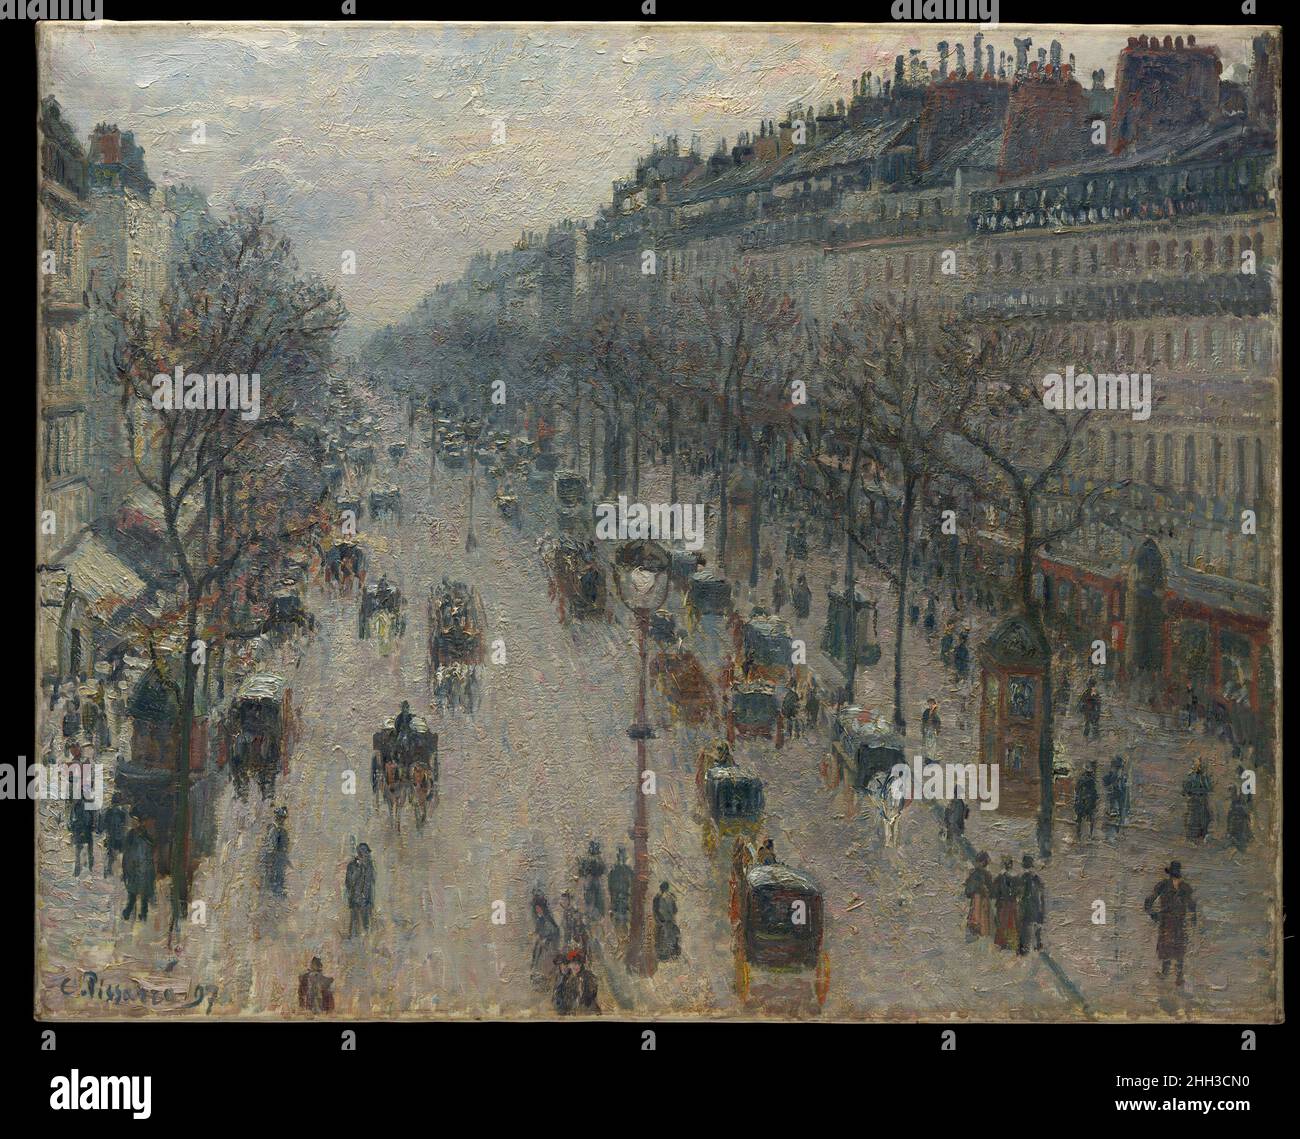 The Boulevard Montmartre on a Winter Morning 1897 Camille Pissarro French After spending six years in rural Éragny, Pissarro returned to Paris, where he painted several series of the grands boulevards. Surveying the view from his lodgings at the Grand Hôtel de Russie in early 1897, Pissarro marveled that he could 'see down the whole length of the boulevards' with 'almost a bird's-eye view of carriages, omnibuses, people, between big trees, big houses that have to be set straight.' From February through April, he recorded—in two scenes of the boulevard des Italiens to the right, and fourteen of Stock Photo